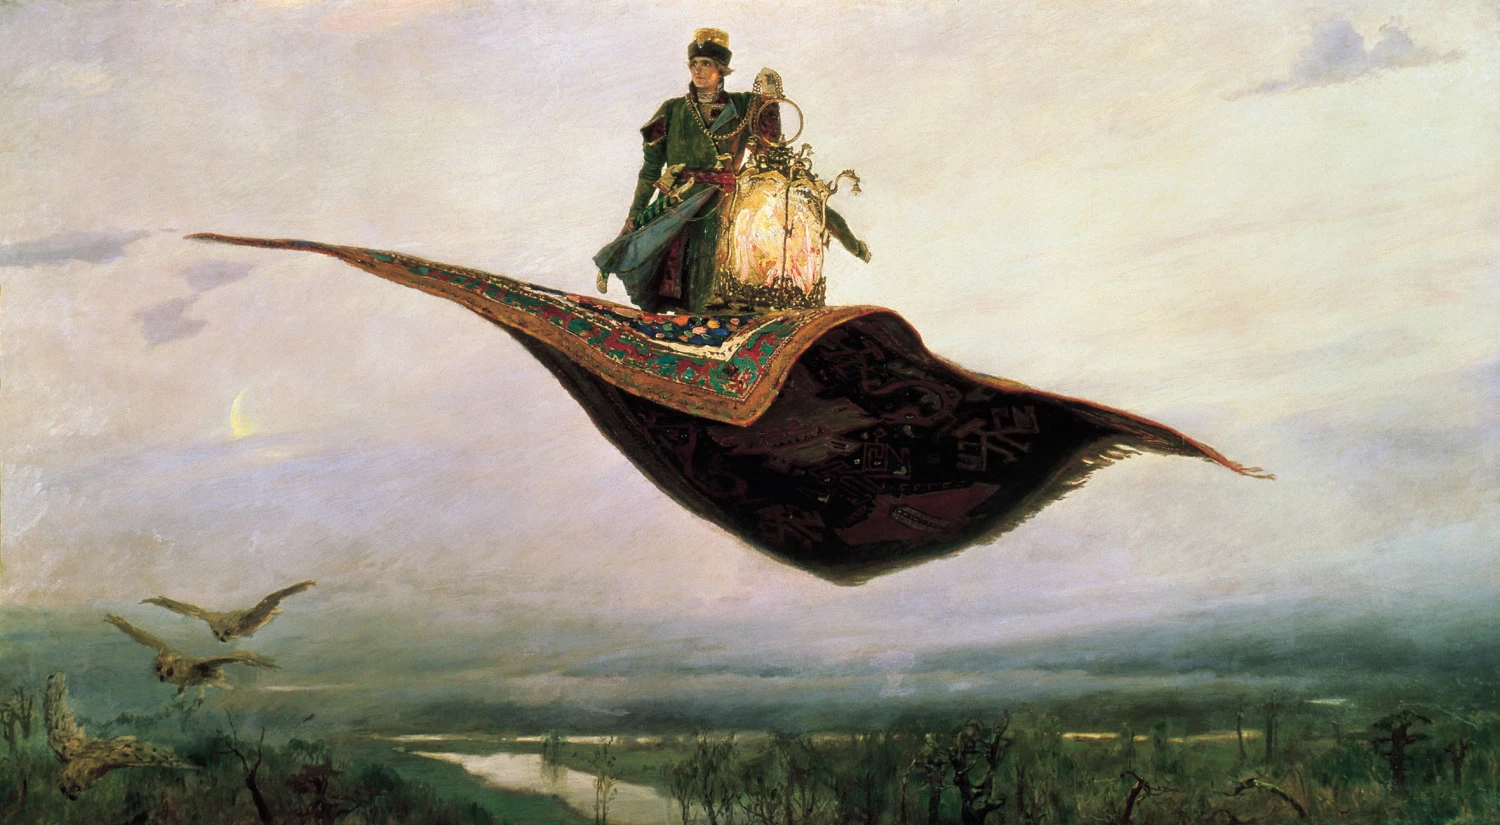 A painting of Ivan the Fool riding a margic carpet with a giant magical lantern, over a bare forest ending at an ongoing river, with birds flying off in the lower right. A sensatin of greyness, desolation, the edge of the world.